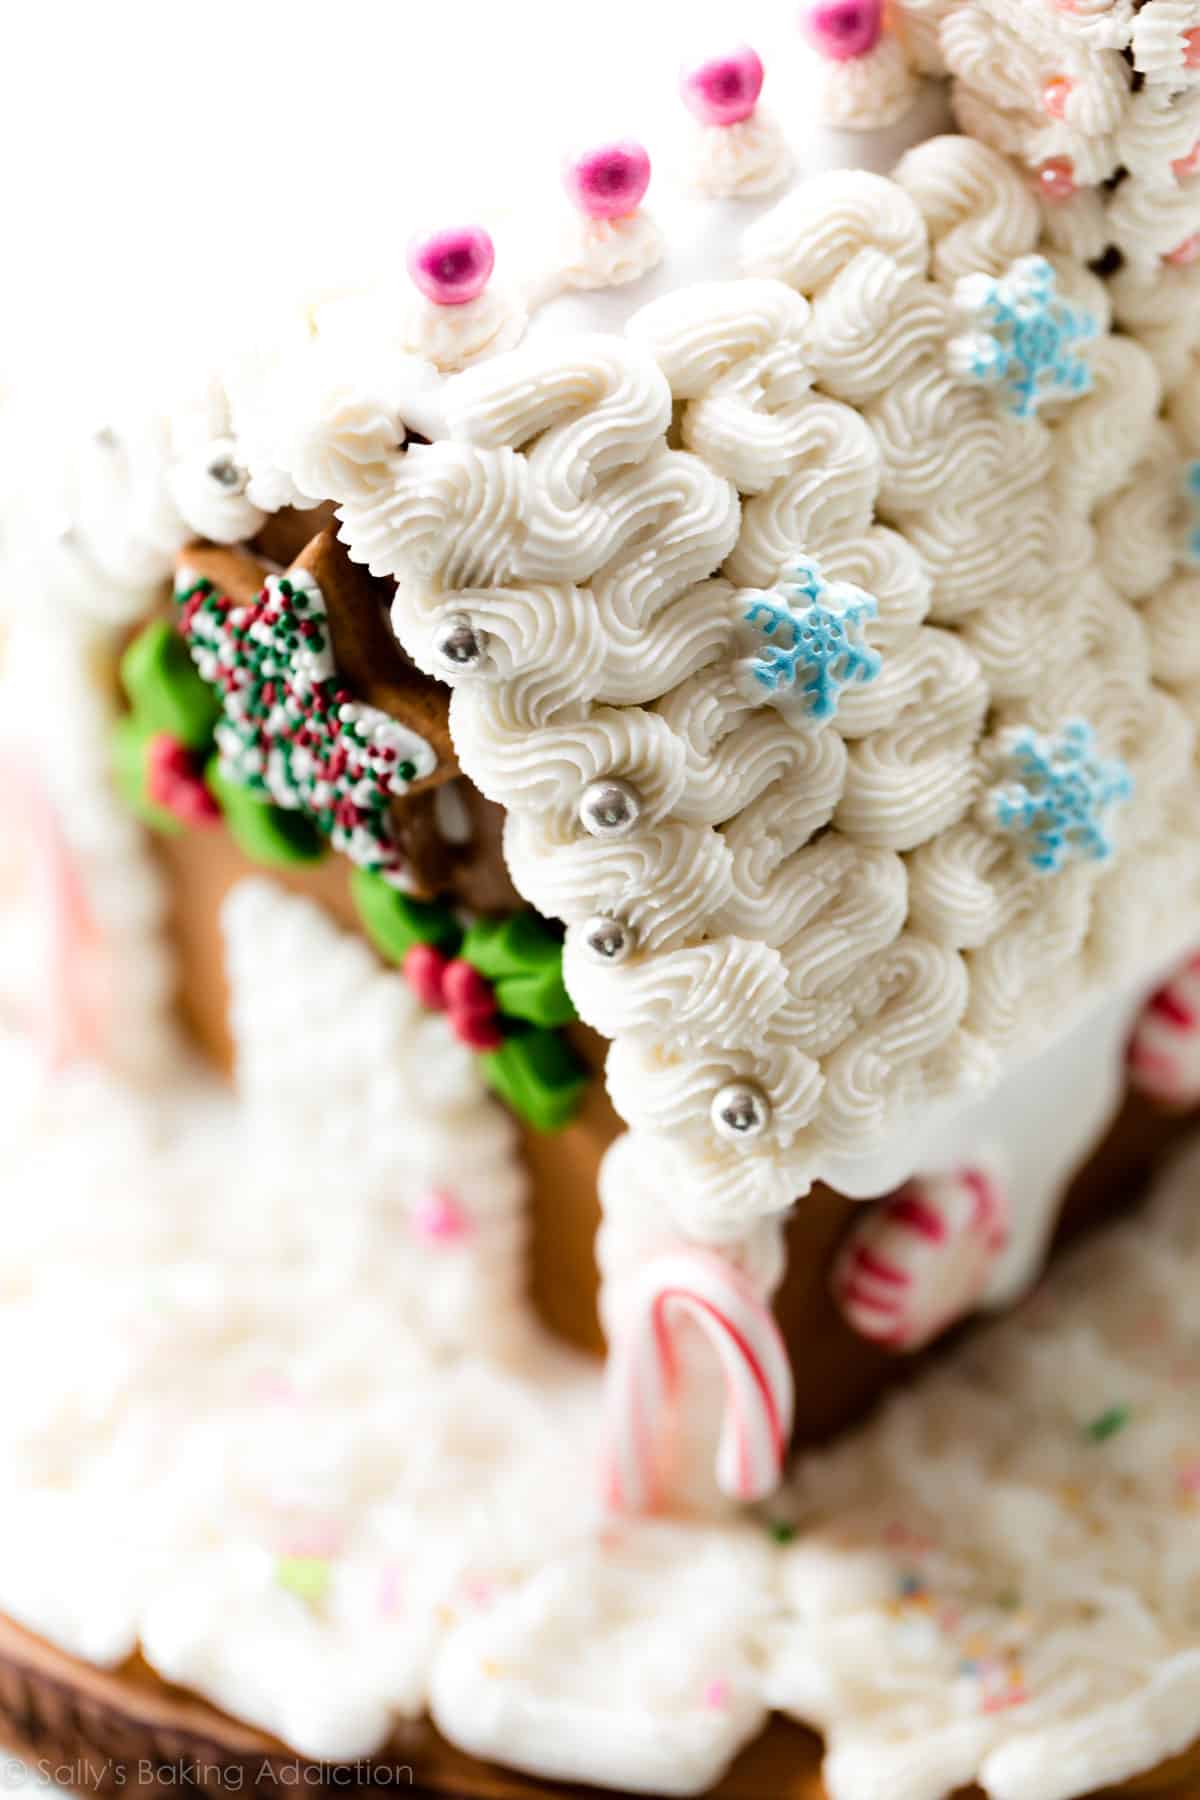 Decorated gingerbread house roof